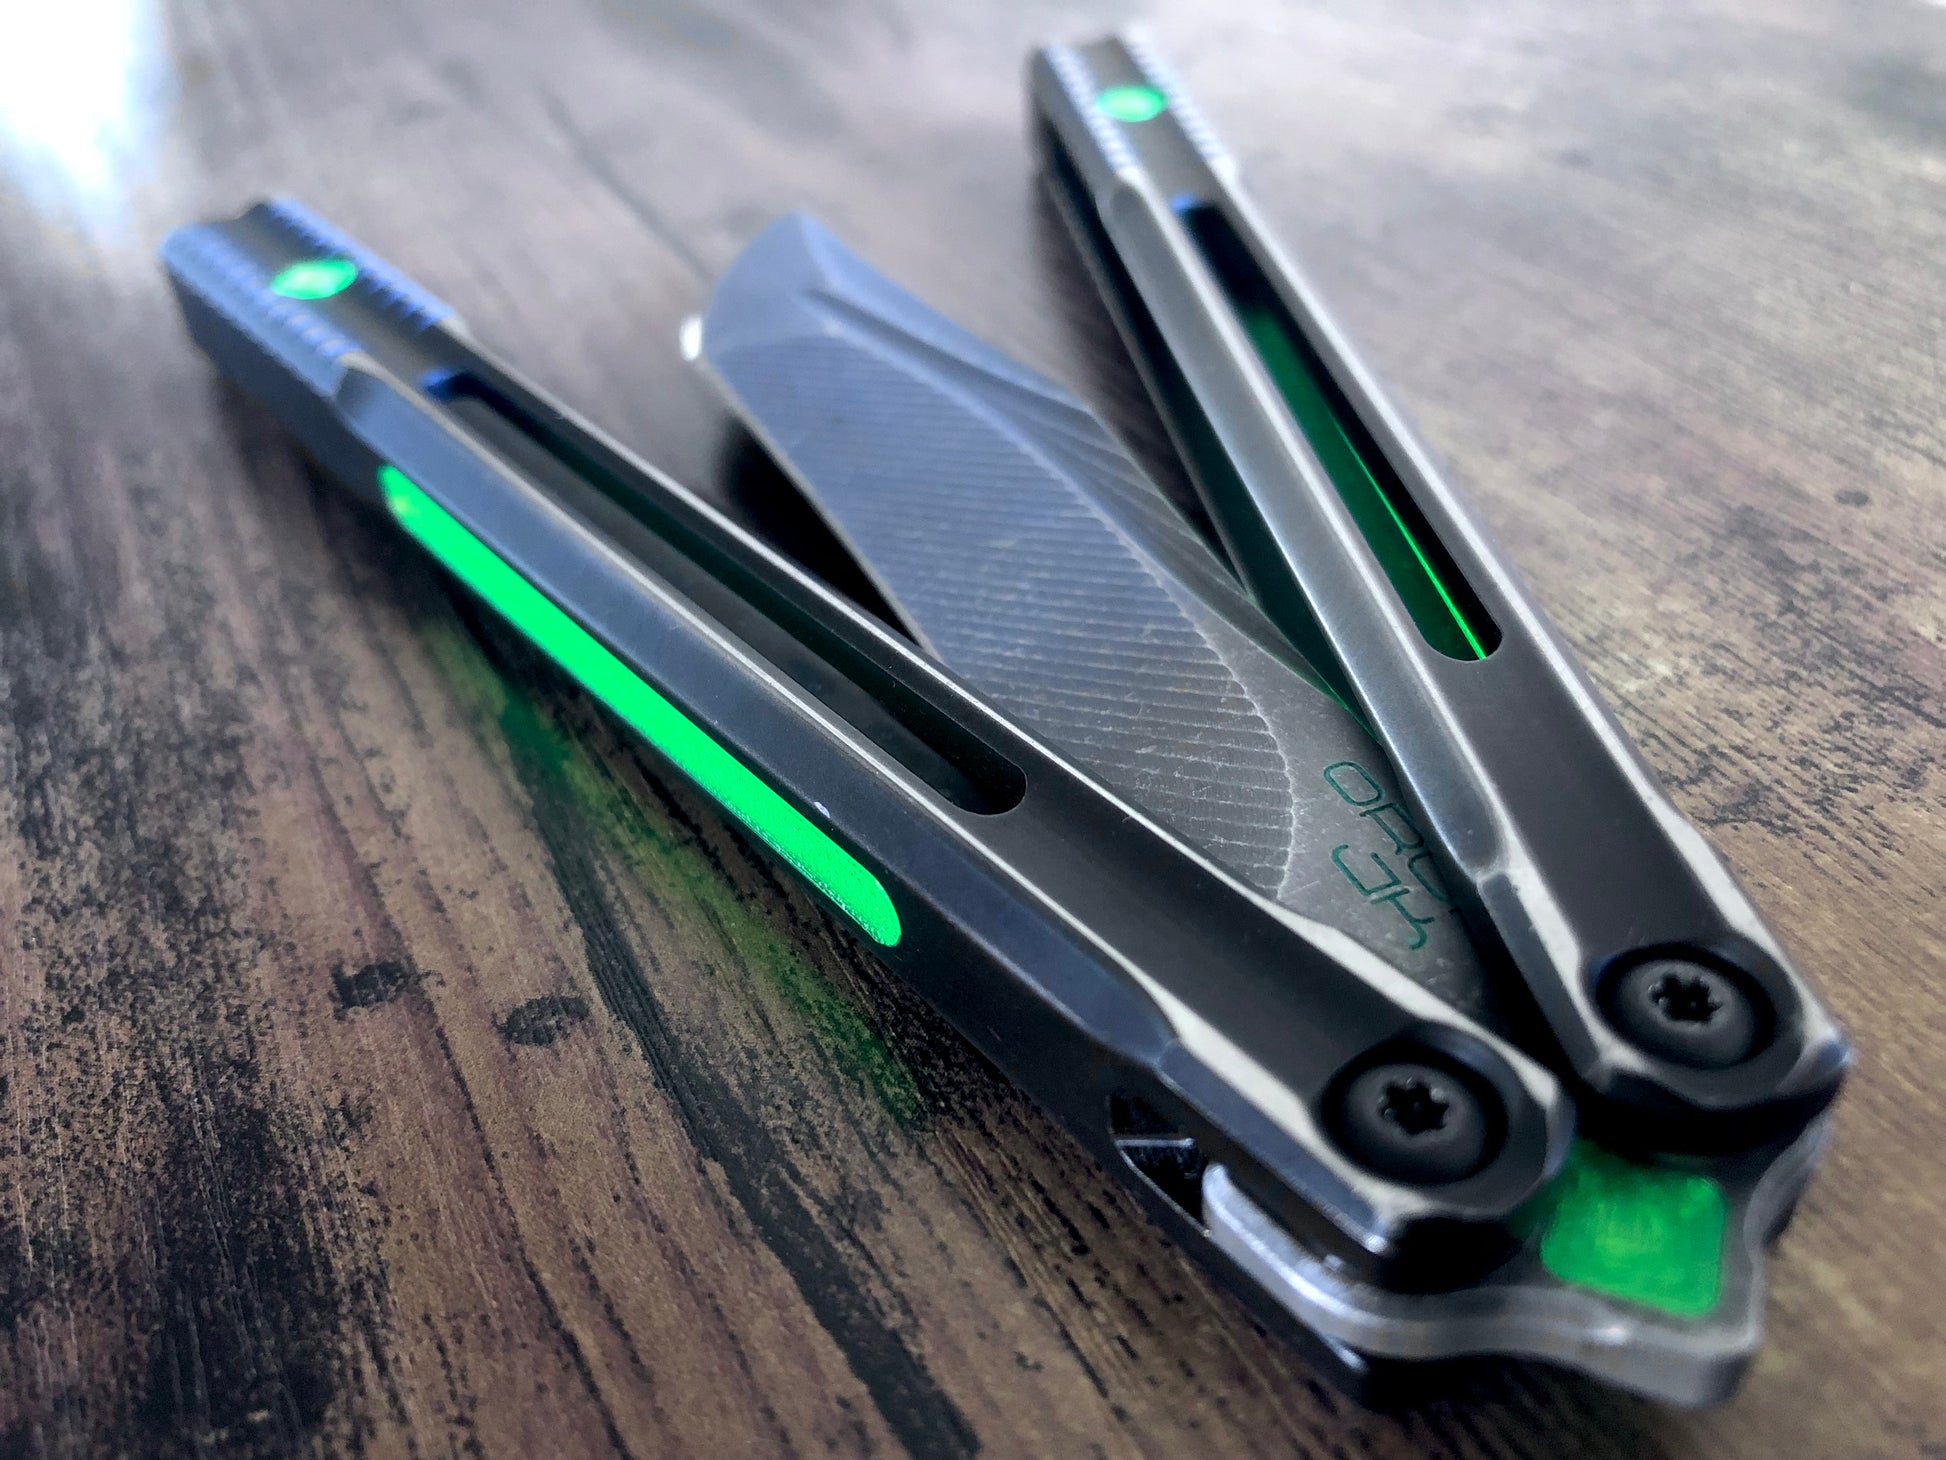 Add a pop of color and silence the ring of your JK Design Orca v2 balisong with these Zippy inlays. This mod consists of tang inlays, speed channel inserts, and "pivot plugs" which fill the bores at the base of the handles. The inlays are made in-house from a rubbery polyurethane and won't pop out on drops